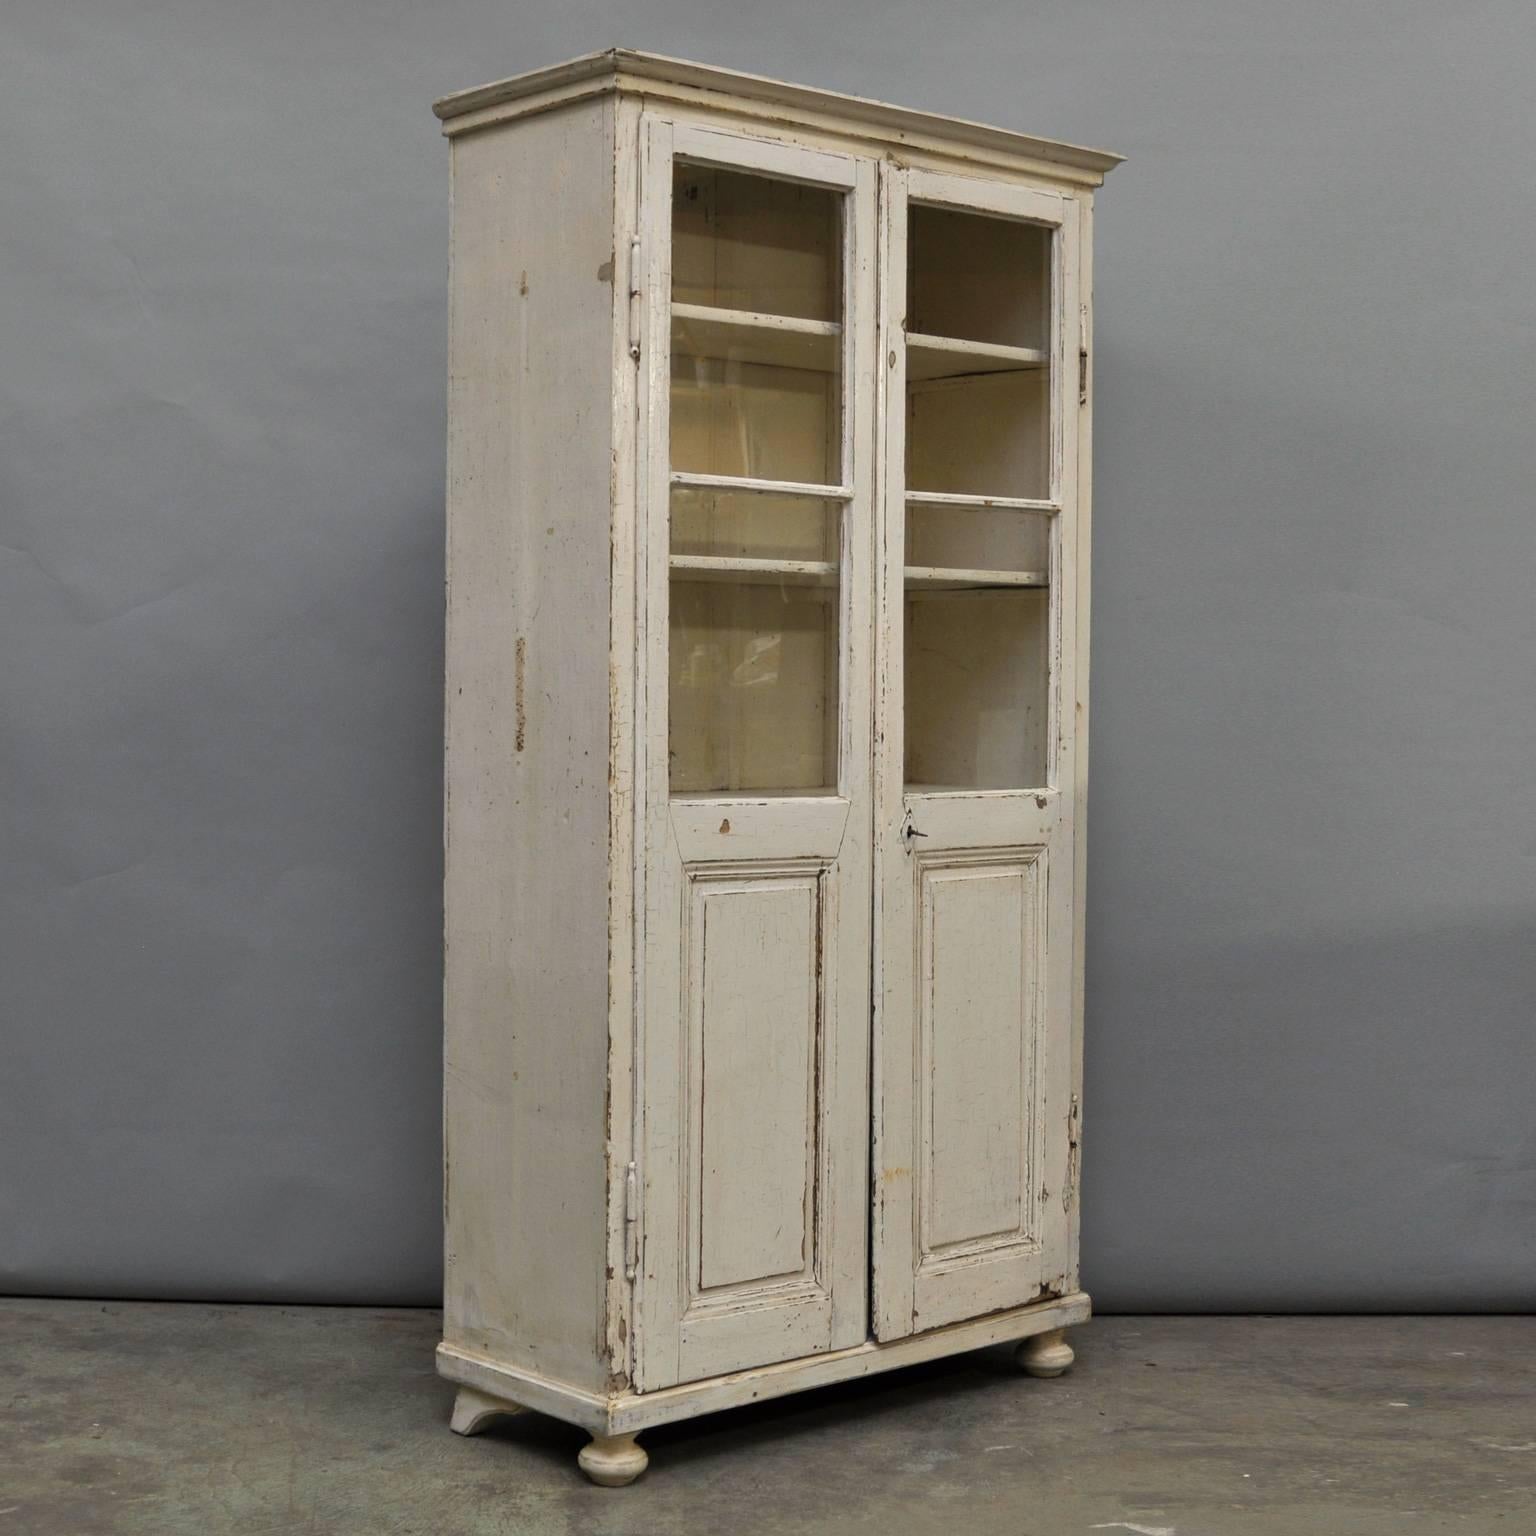 This cabinet was manufactured early in the 20th century. It is made from wood, featuring two glass display windows, two swinging doors and shelves within the interior. The display cabinet has been polished and is in a very good antique condition